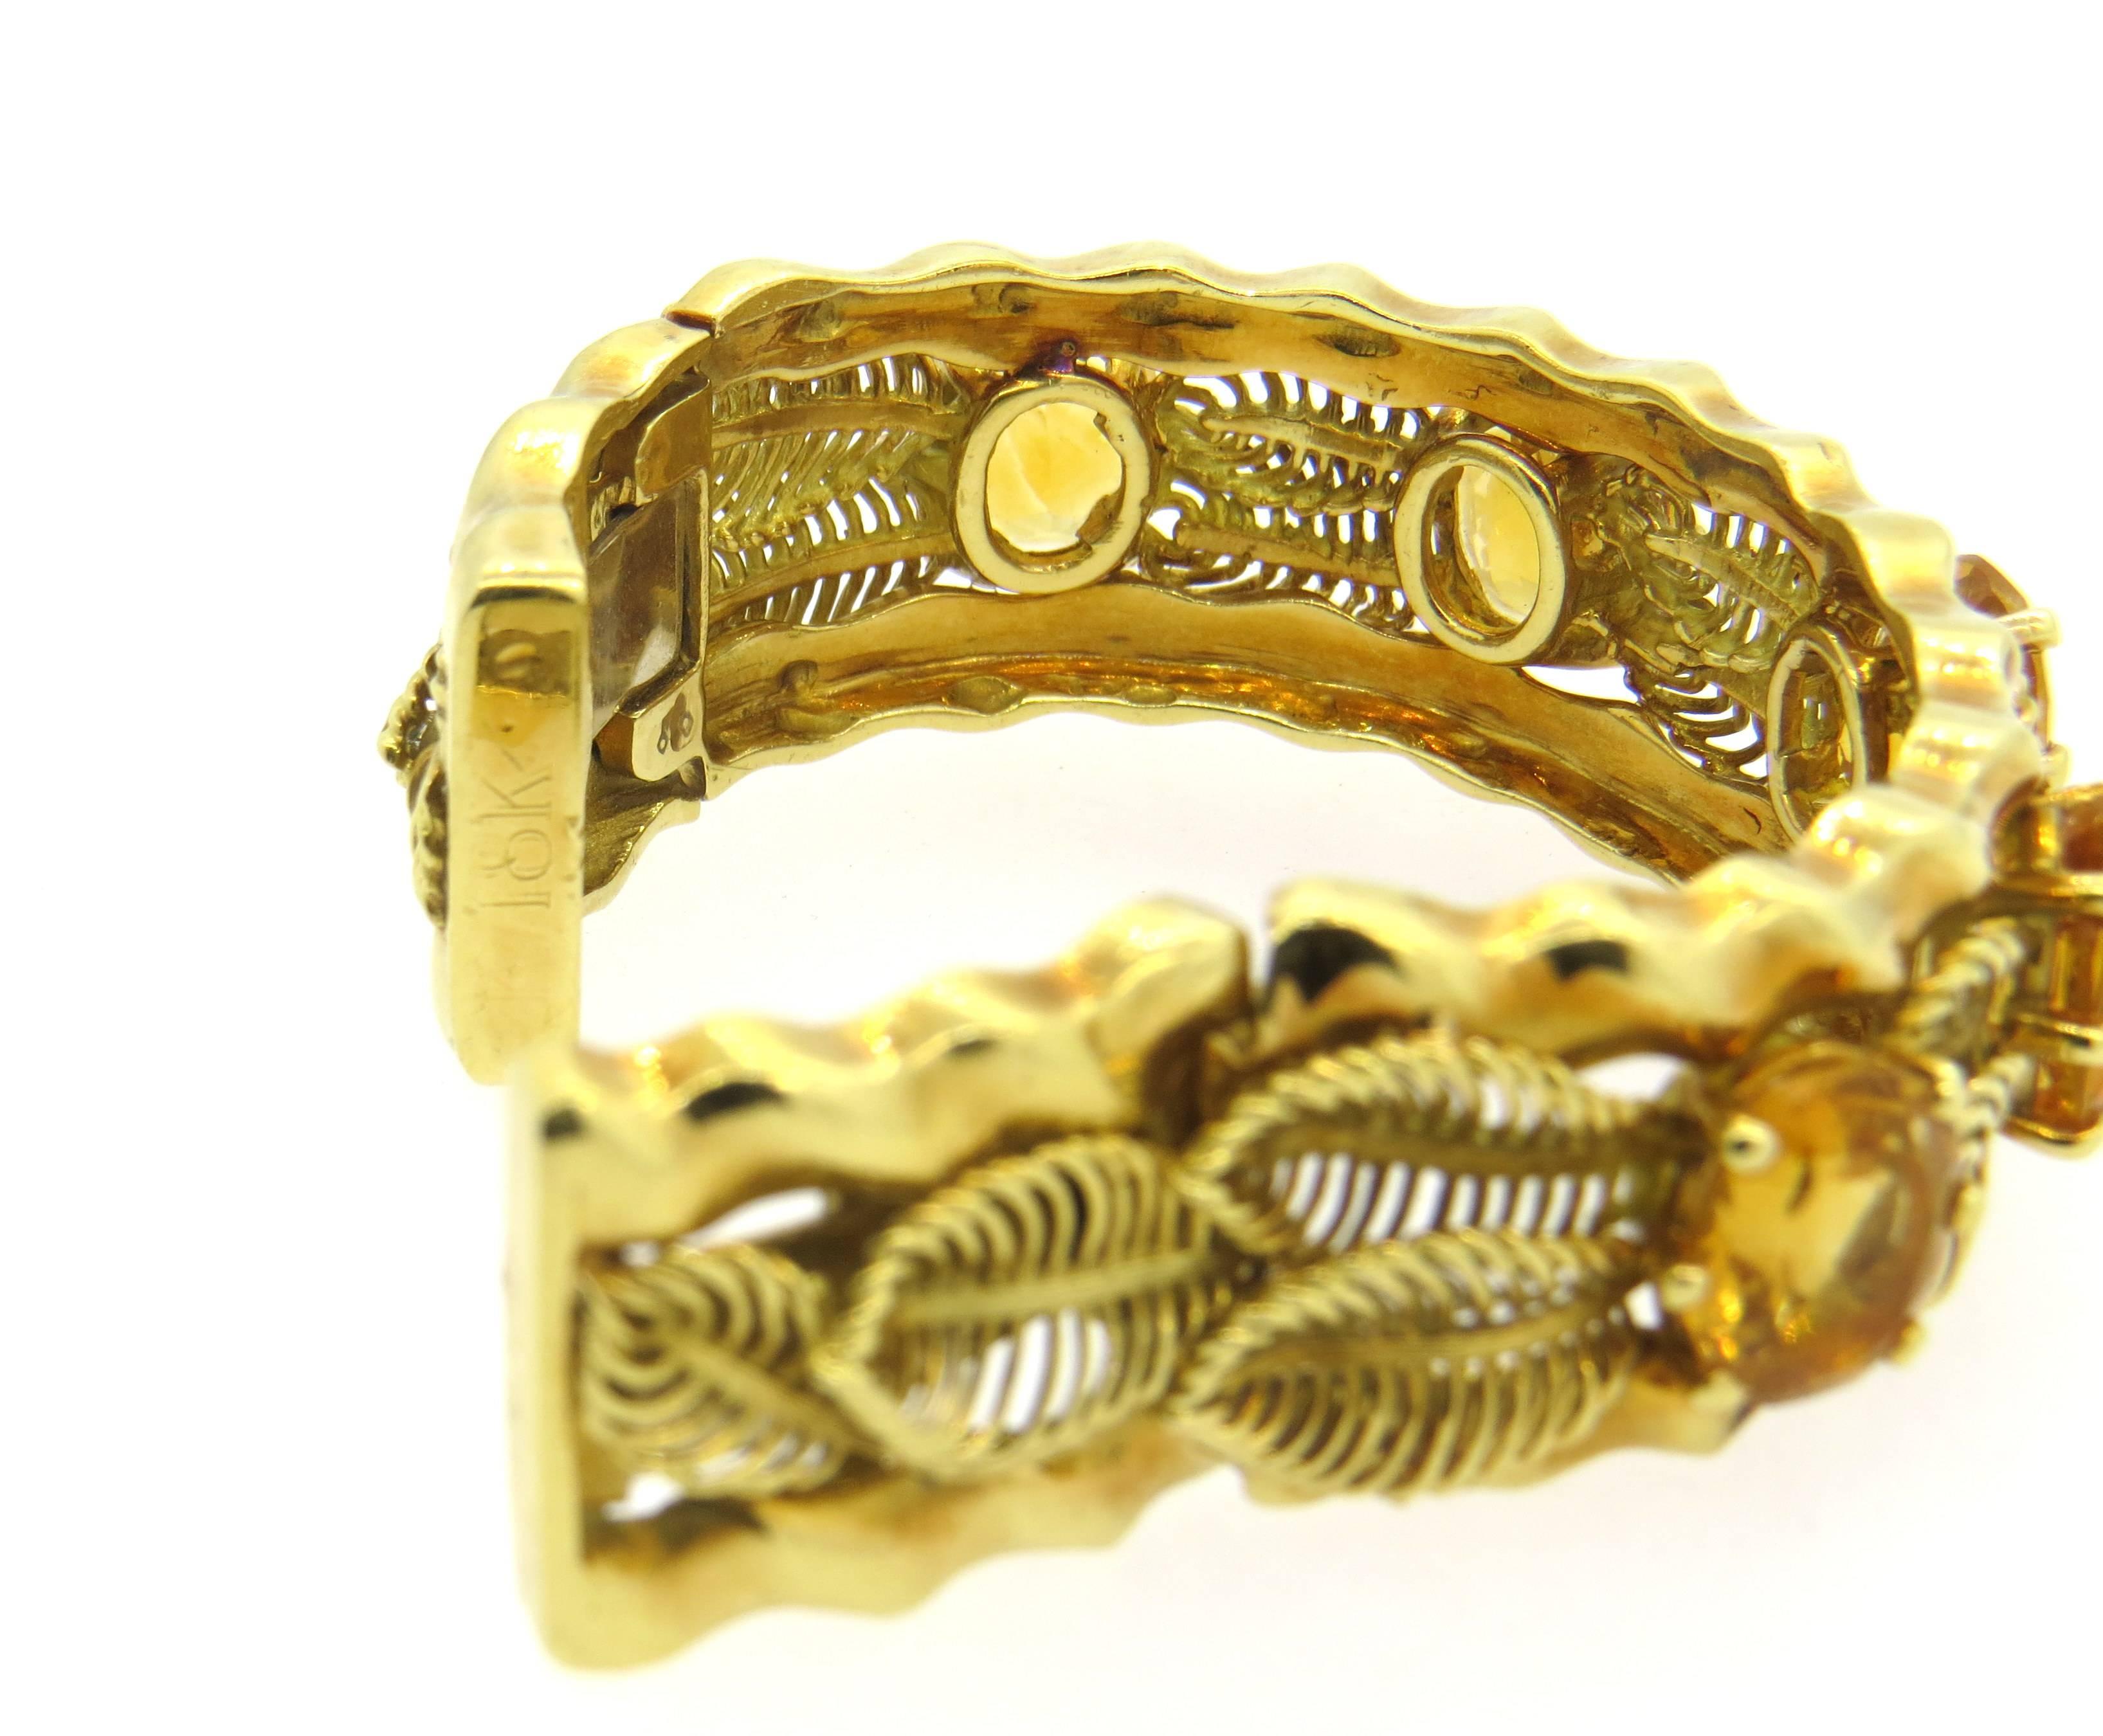 Fine 18k yellow gold leaf motif cuff, crafted with five oval citrine gemstones. Bracelet will fit up to 6 1/2